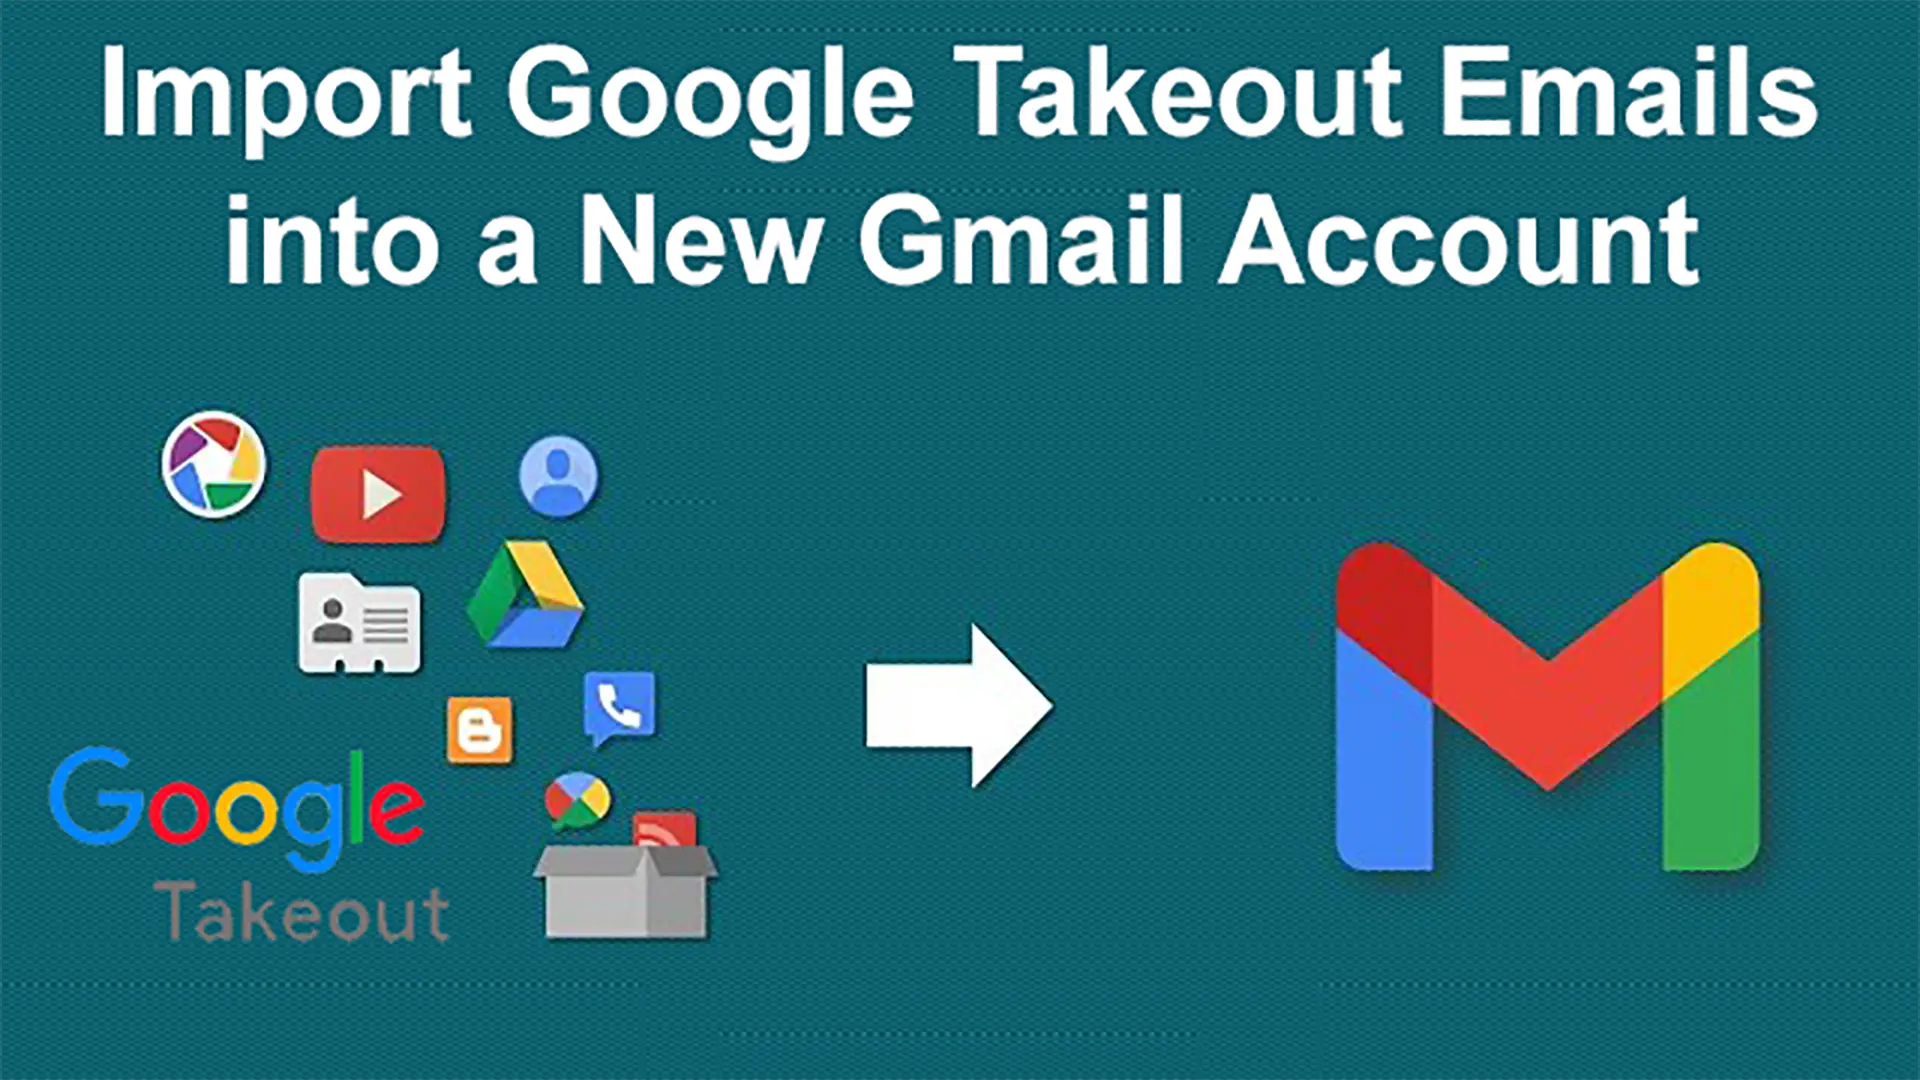 Import Google Takeout Emails into a New Gmail Account in Simple Steps